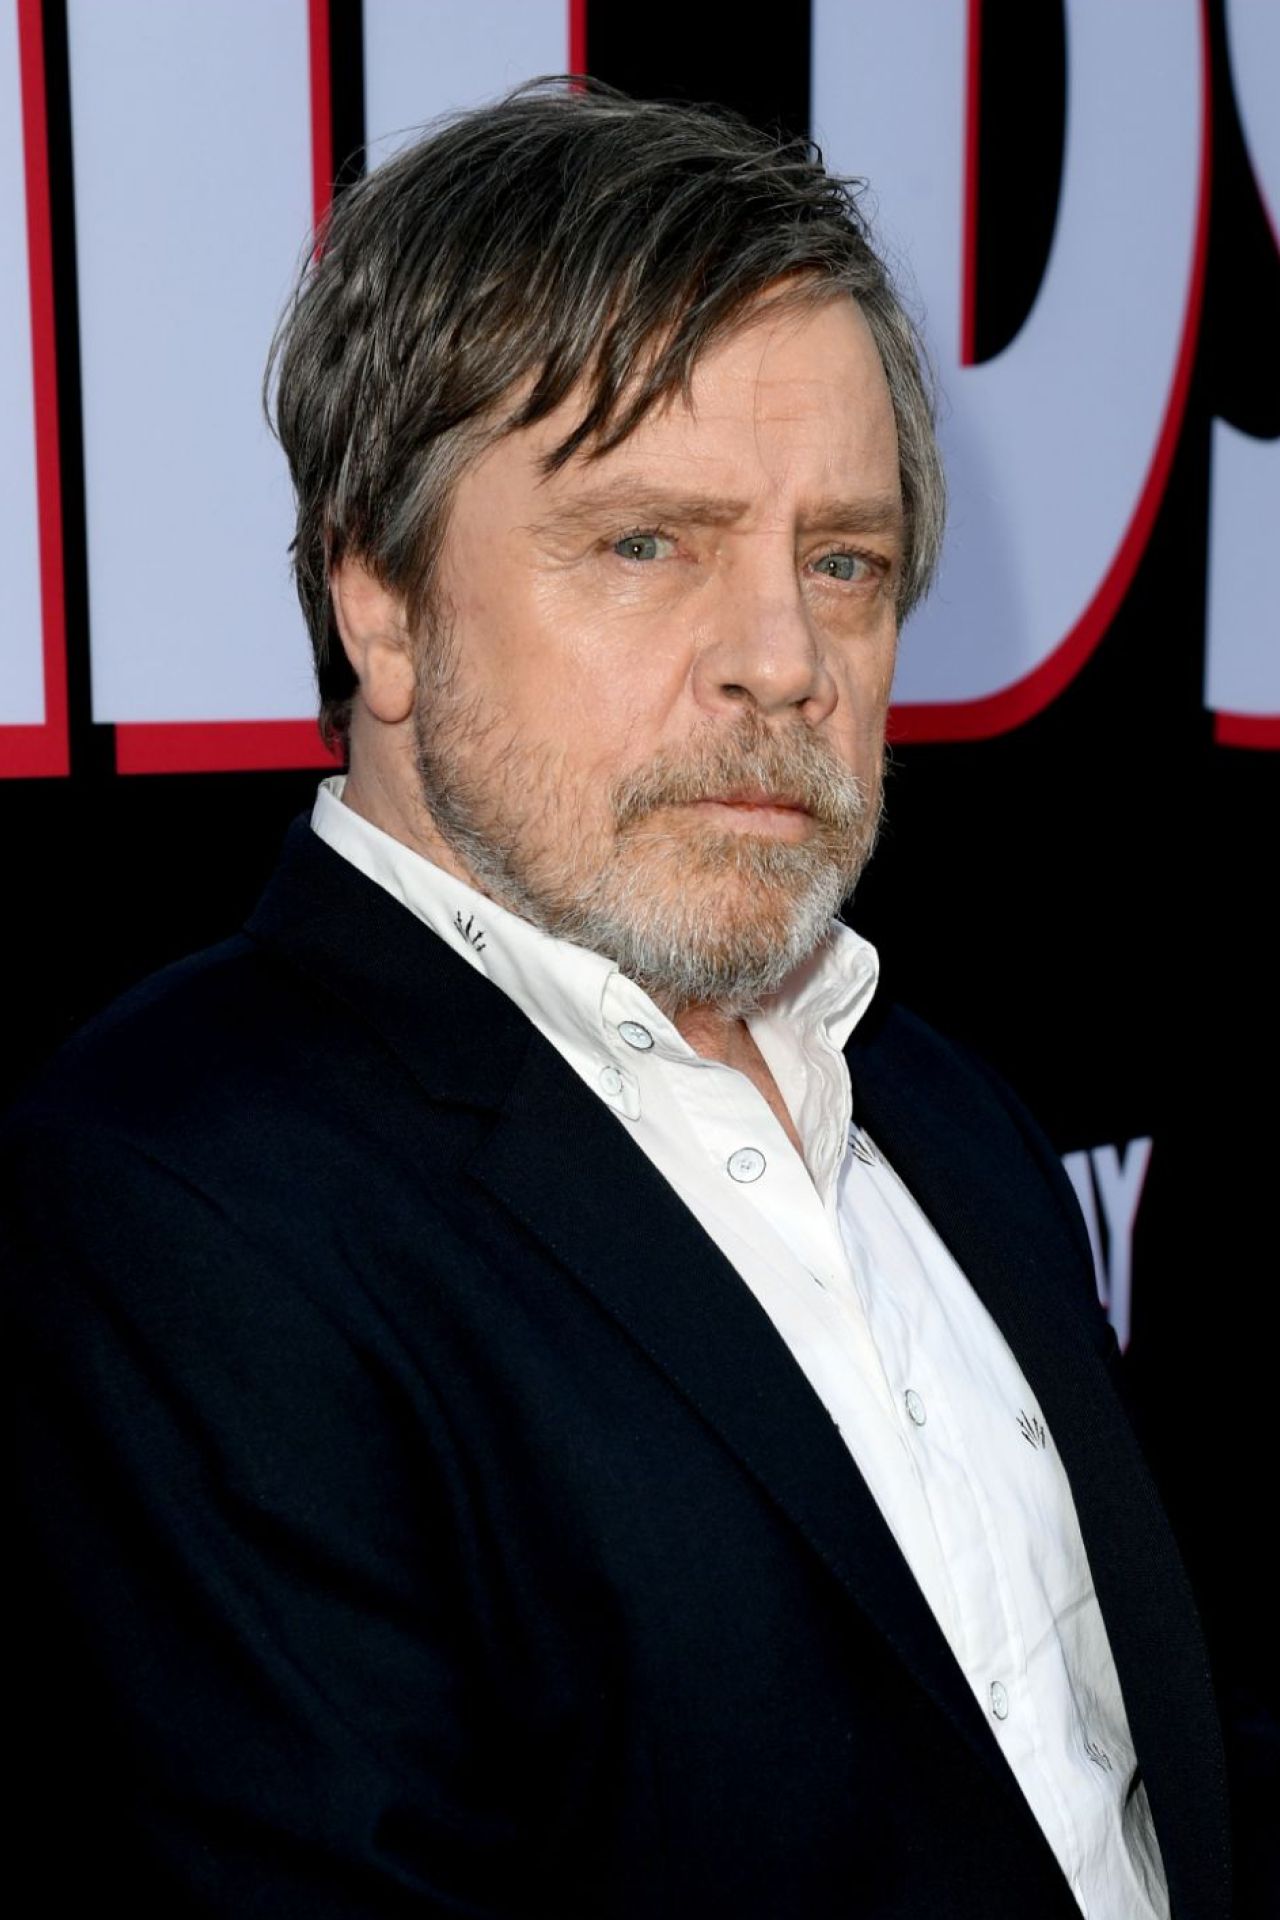 <h2>Mark Hamill</h2><p>Mark Hamill was openly unhappy with the version of Luke in the latest Star Wars Trilogy, telling <em>The Last Jedi</em> director Rian Johnson, "I hate what you’ve done with my character." Hamill even said that the only way he could cope with the role was thinking about his character as an entirely different person. “Maybe he’s Jake Skywalker. He’s not my Luke Skywalker."</p>